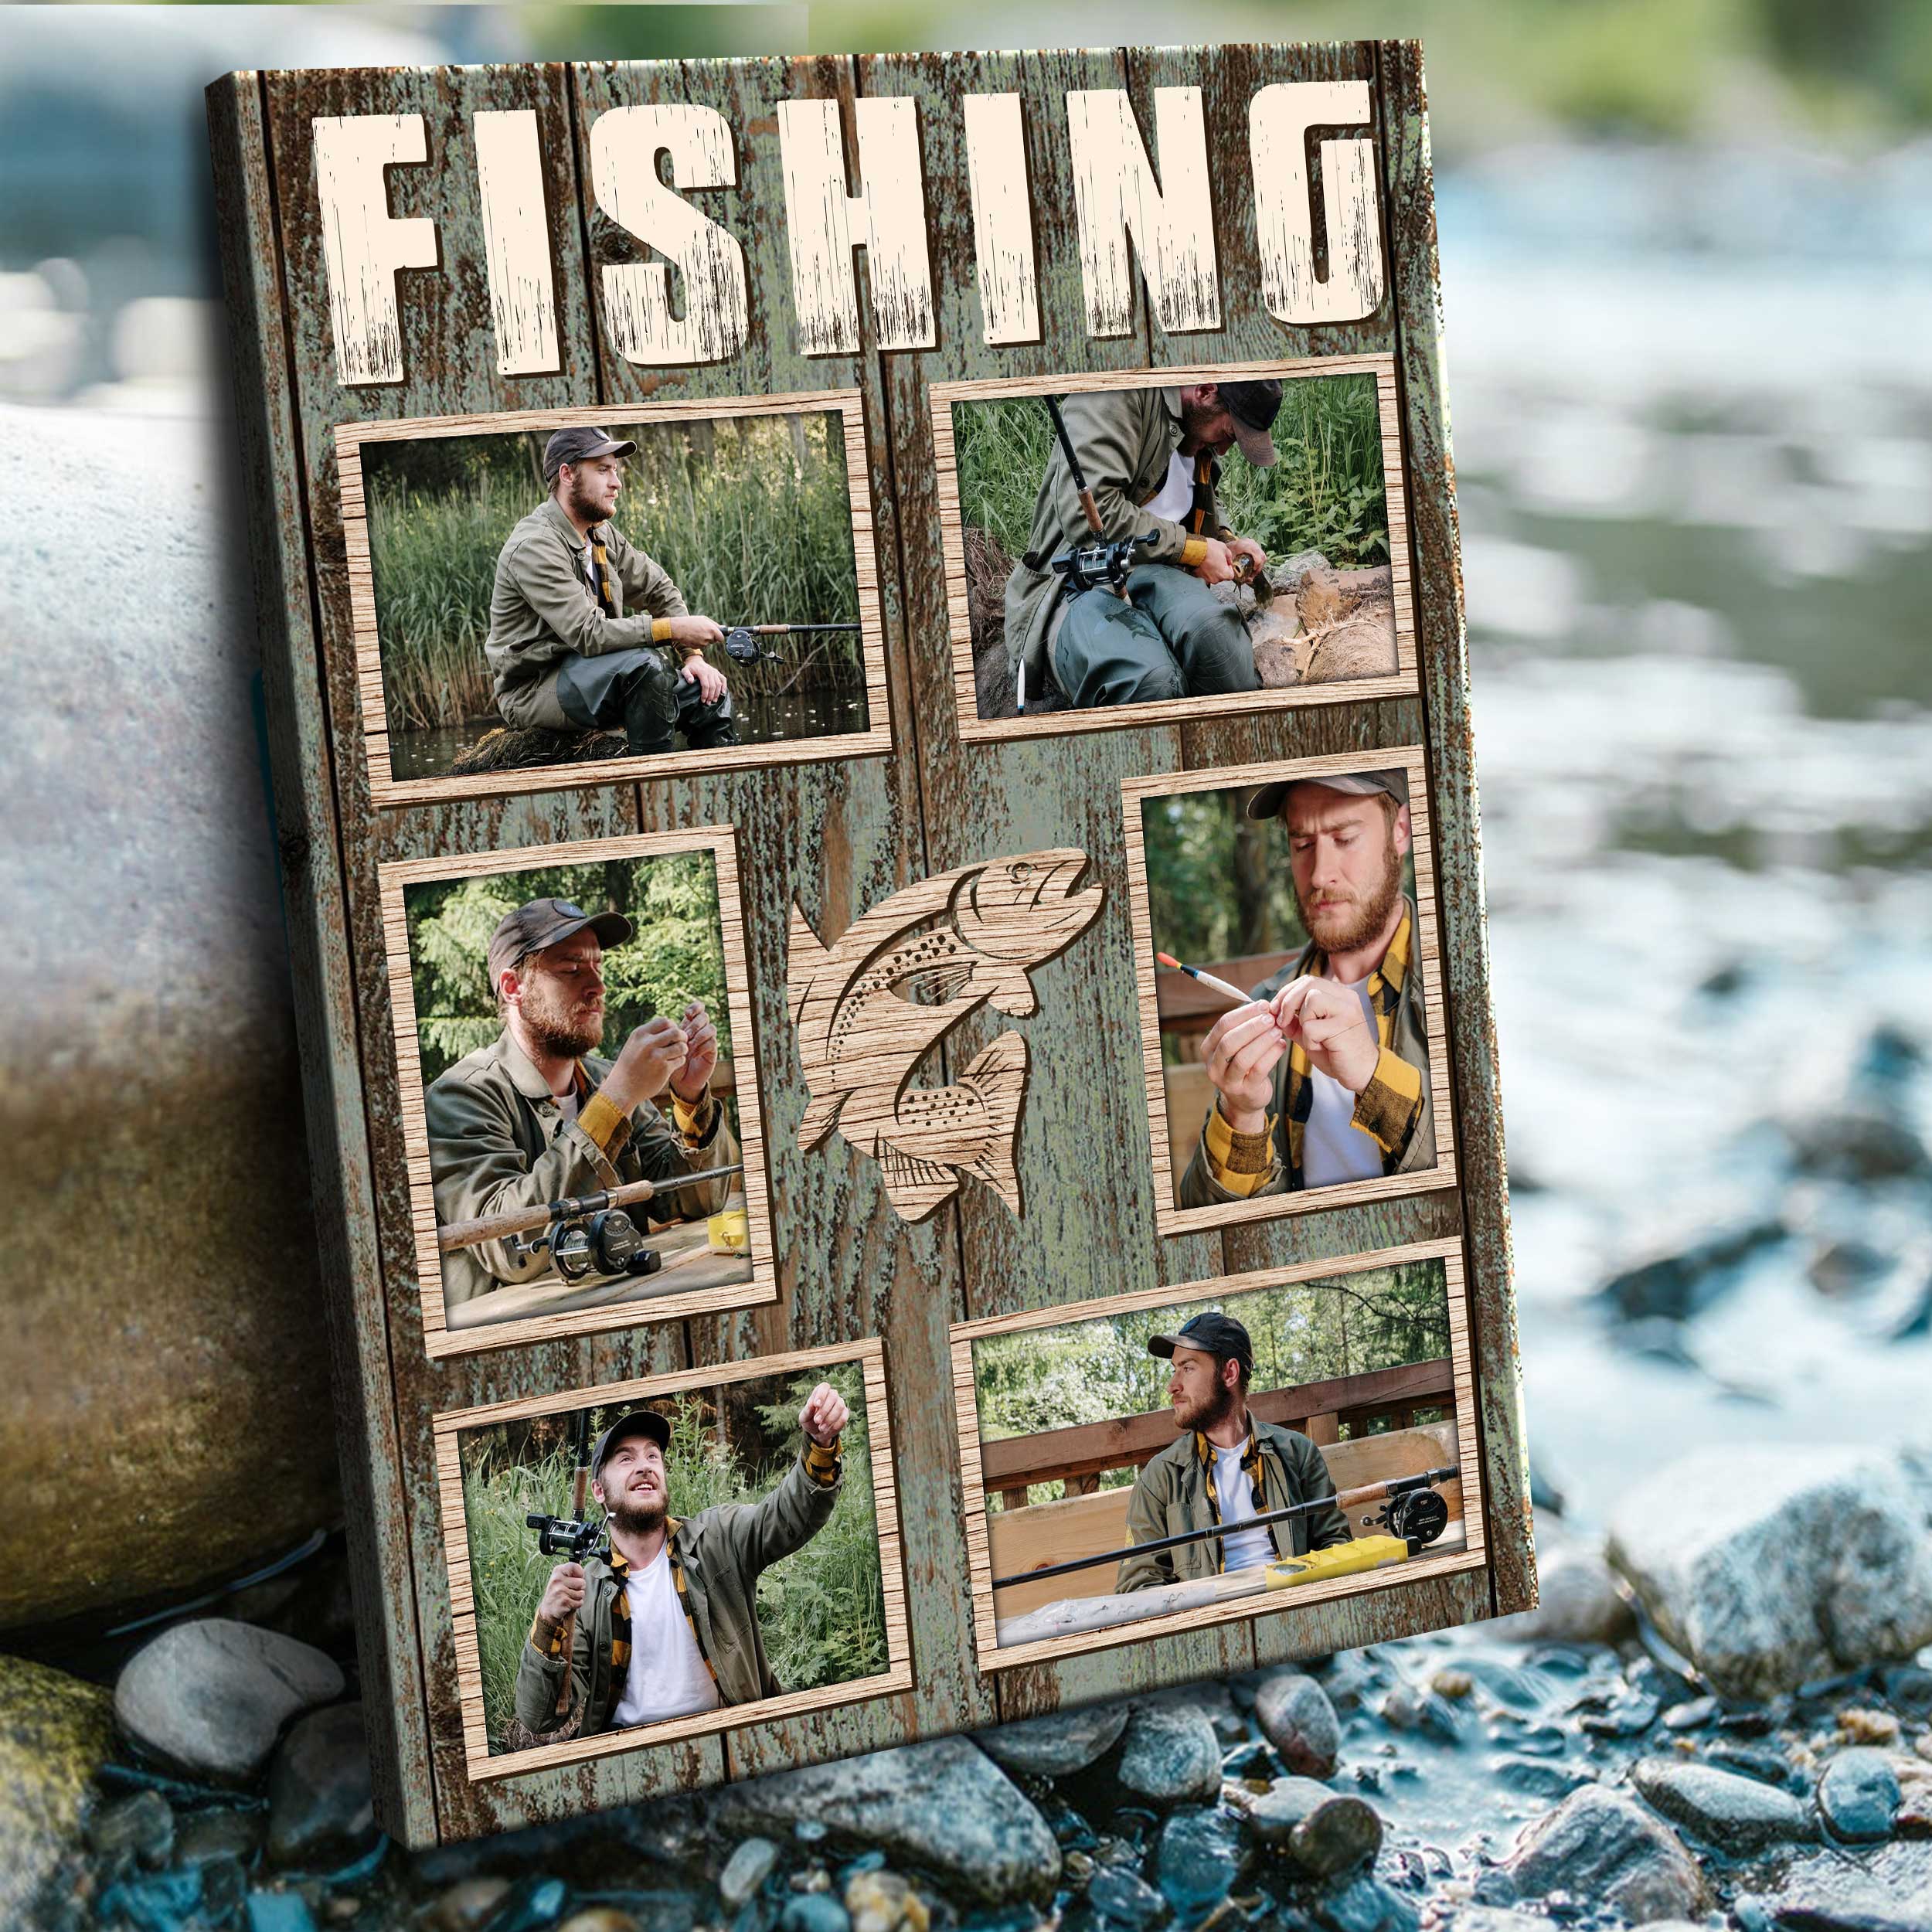 https://benicee.com/wp-content/uploads/2022/09/Custom-Fishing-Photo-Collage-Canvas-Best-Gifts-For-Fisherman-Fishing-Gifts-For-Men-4.jpg